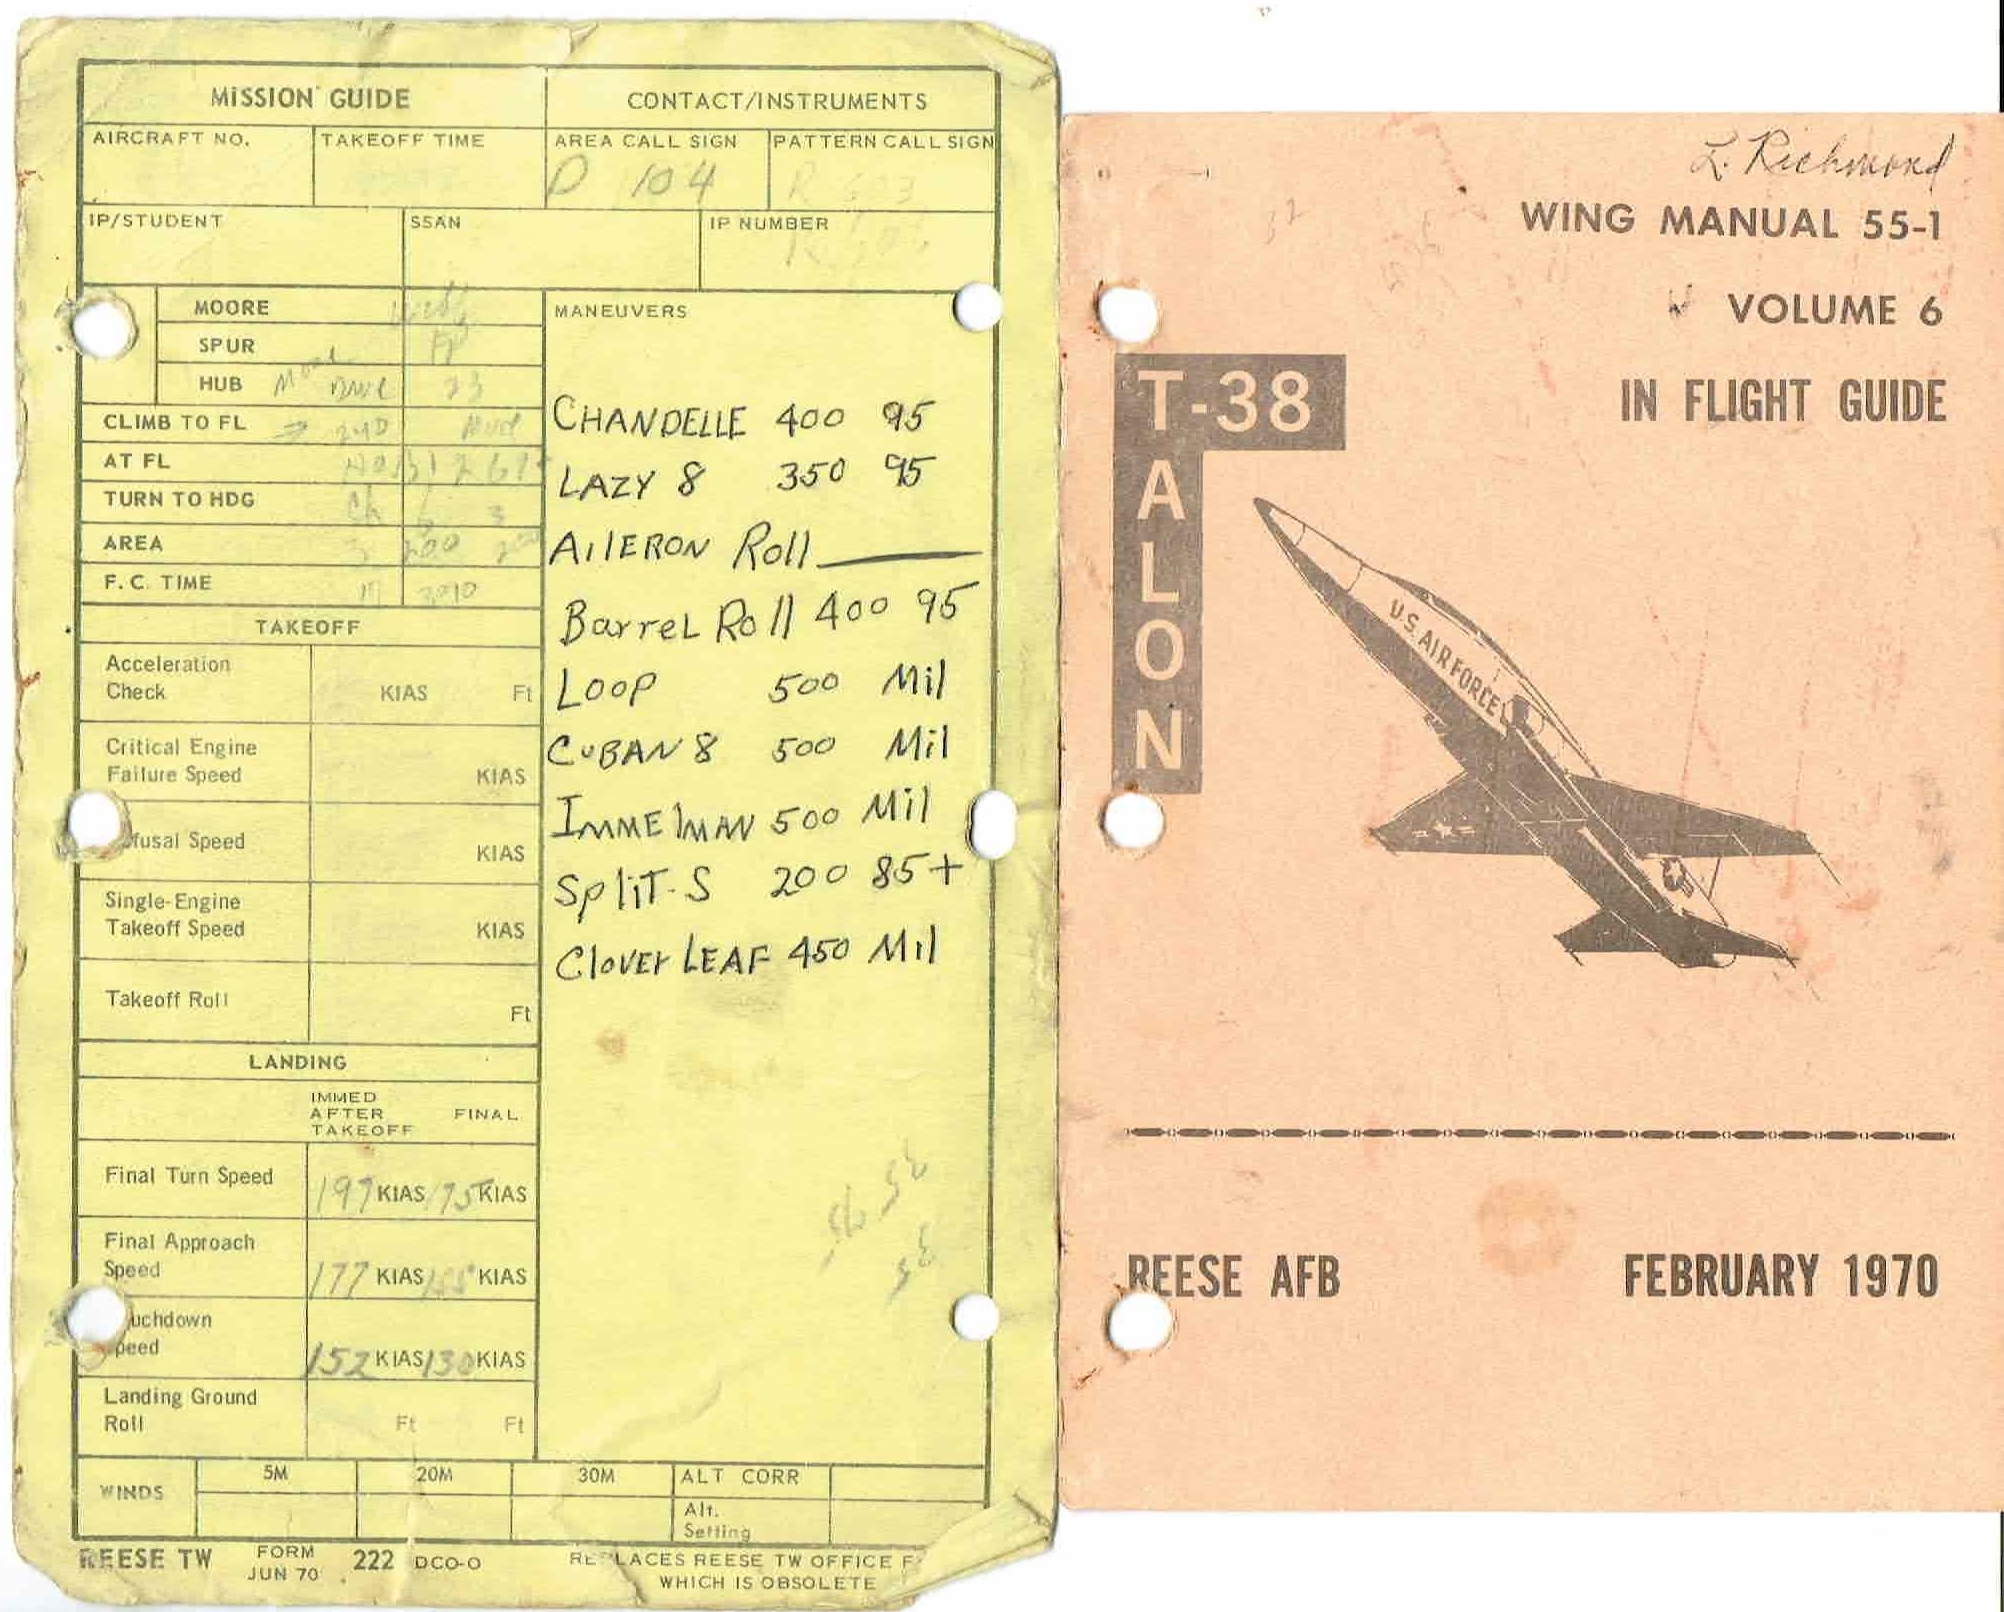 Jeff's notes from his T-38 training flights back in 1970.